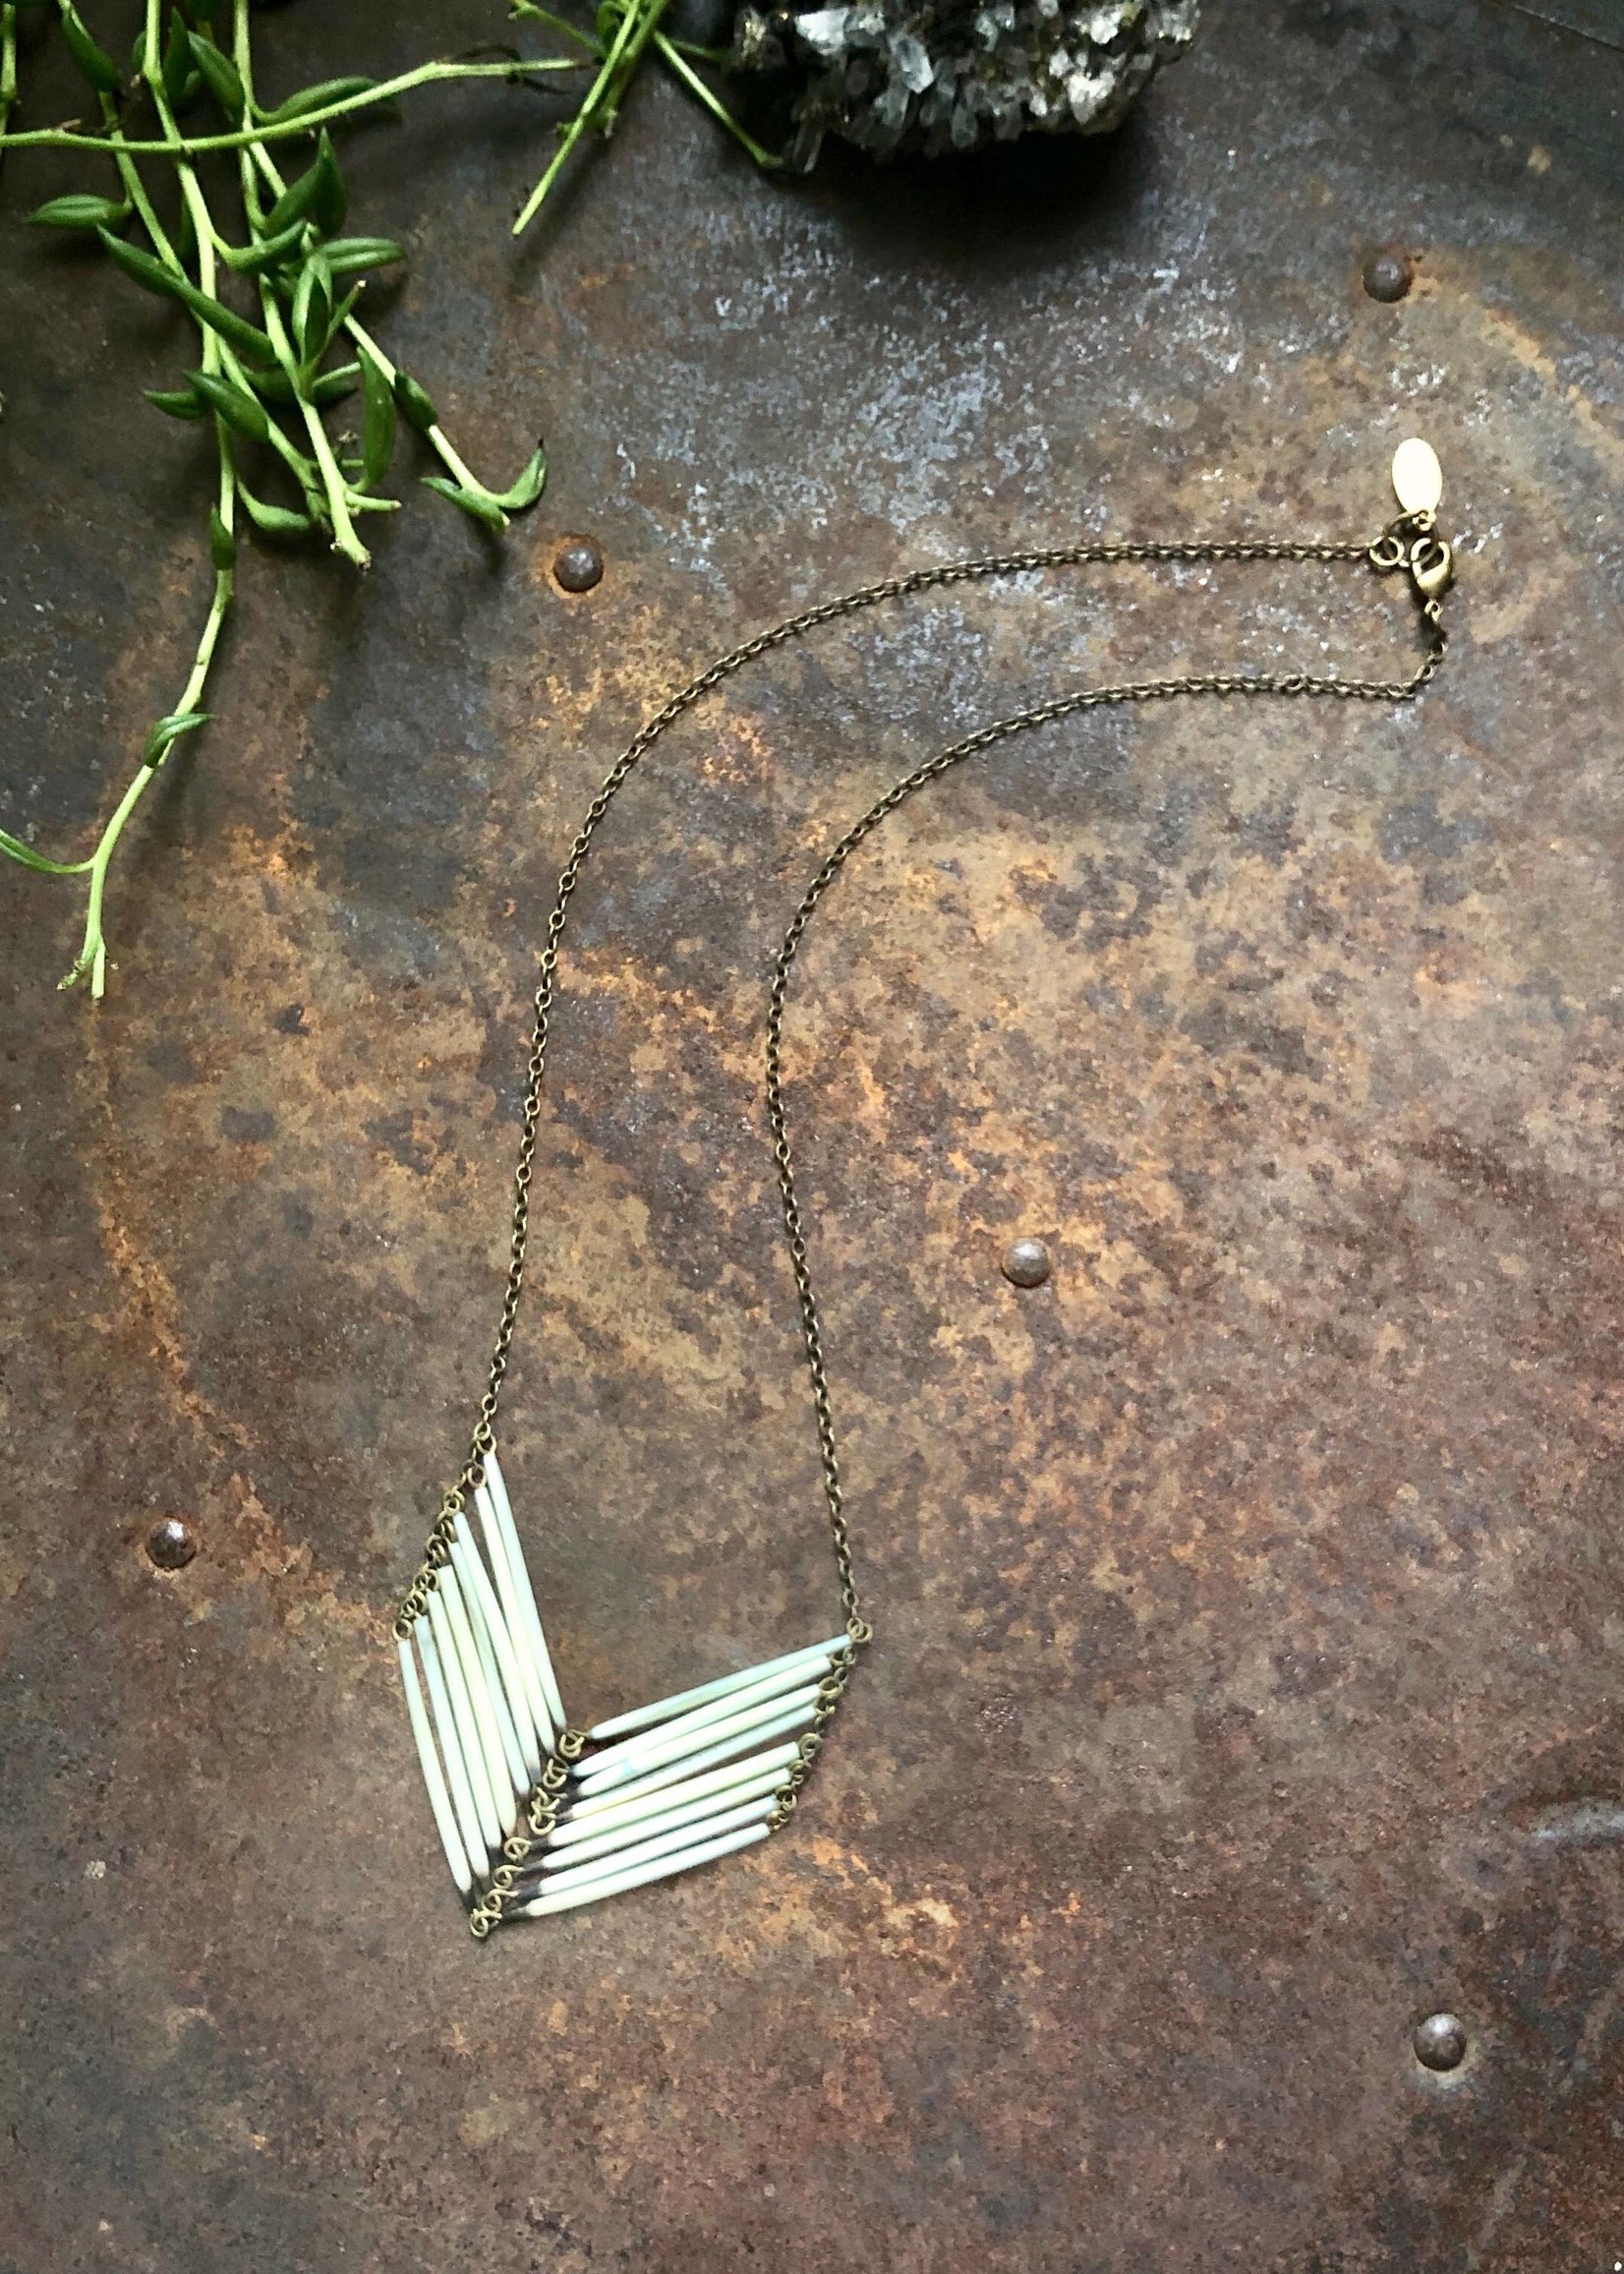 porcupine jewelry | African Porcupine quills used in 